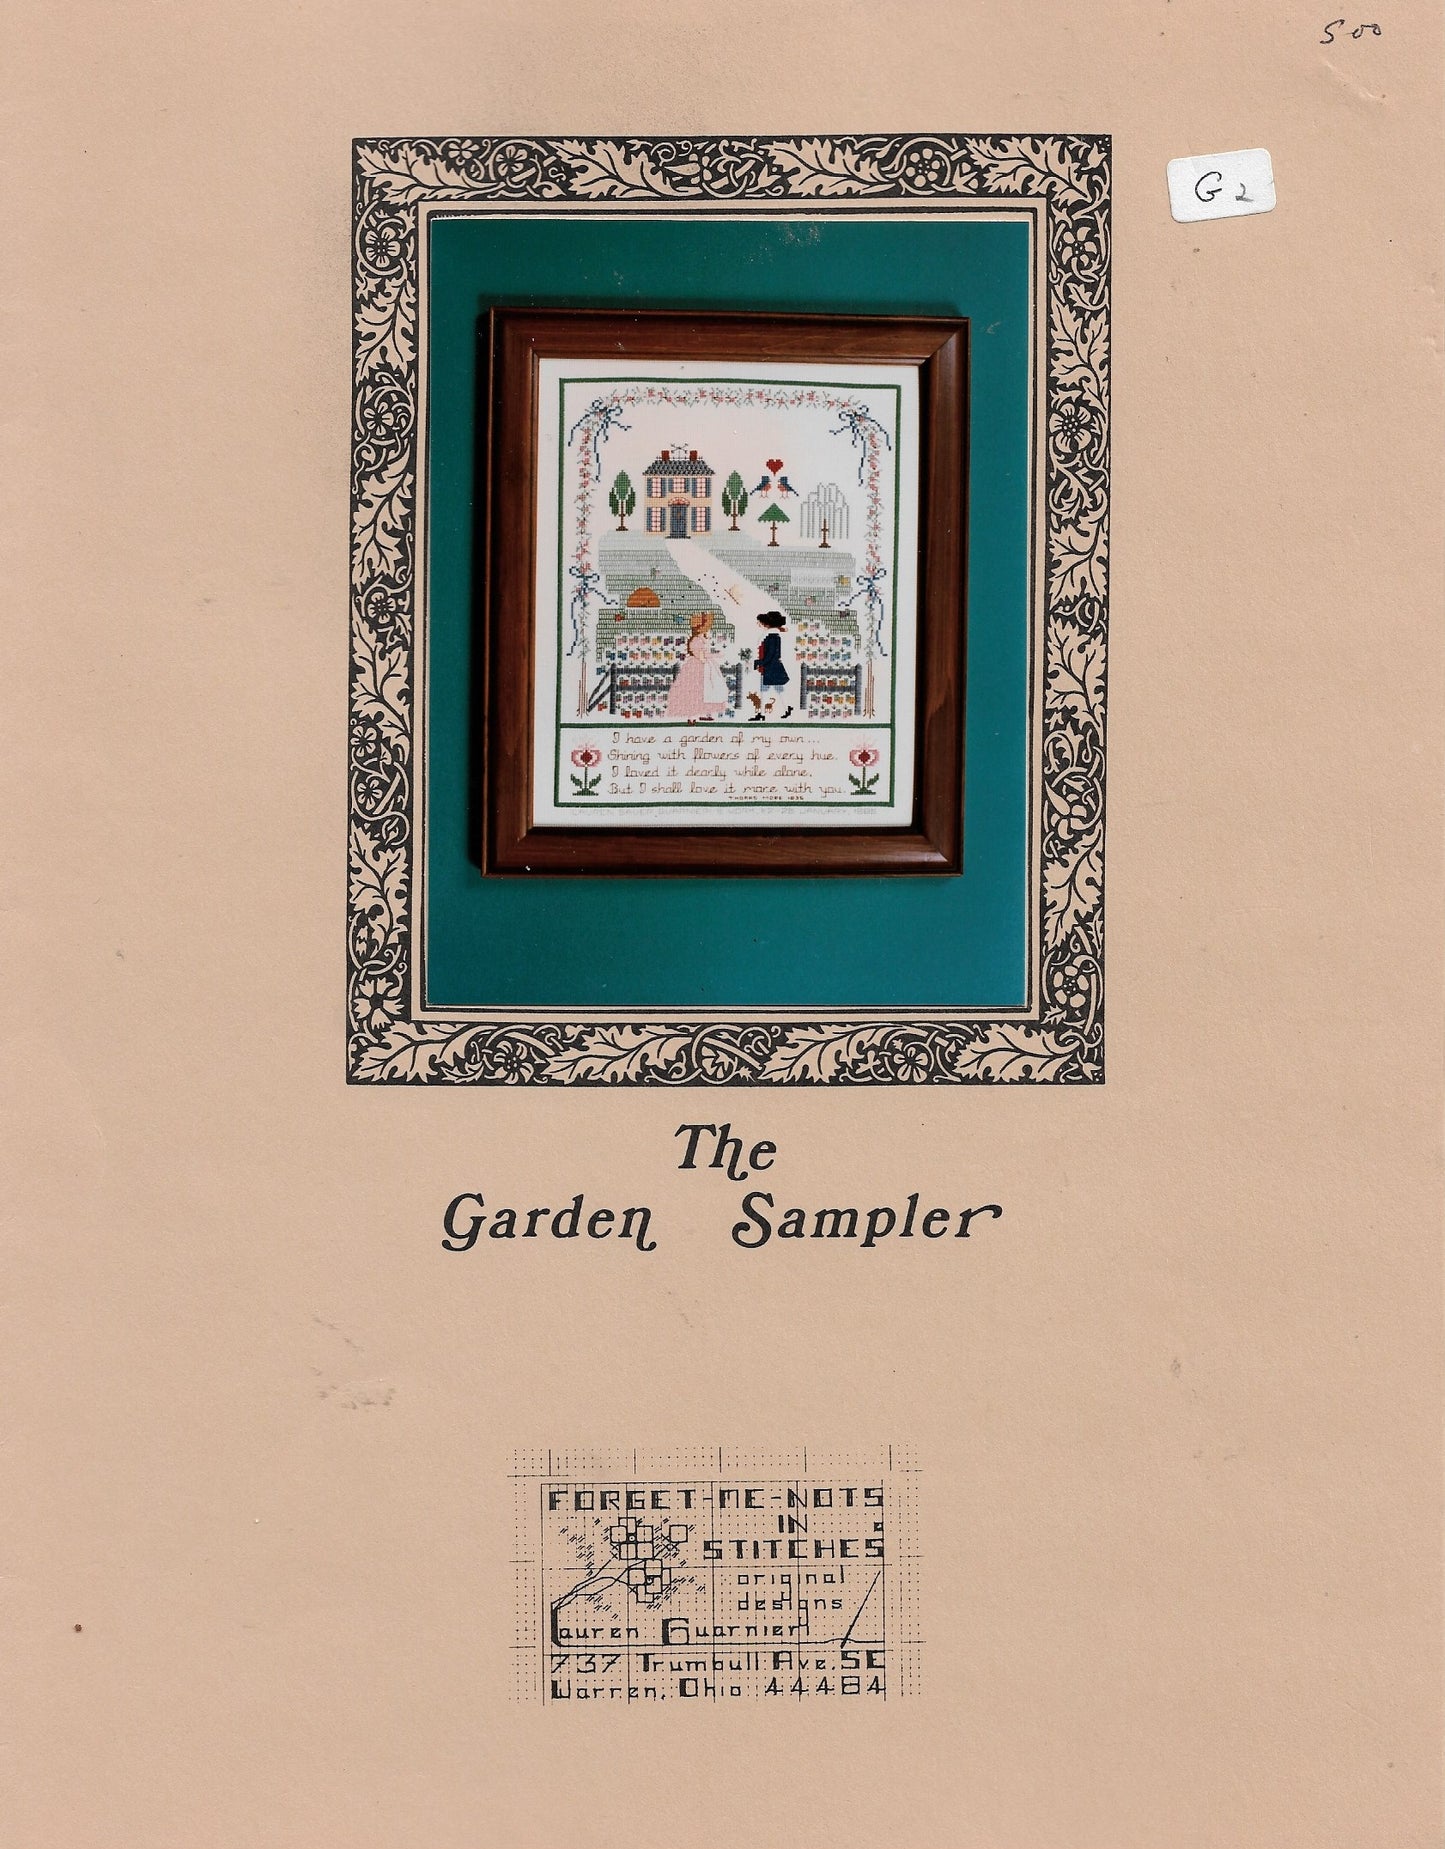 Forget Me Not in Stitches The Garden Sampler cross stitch sampler